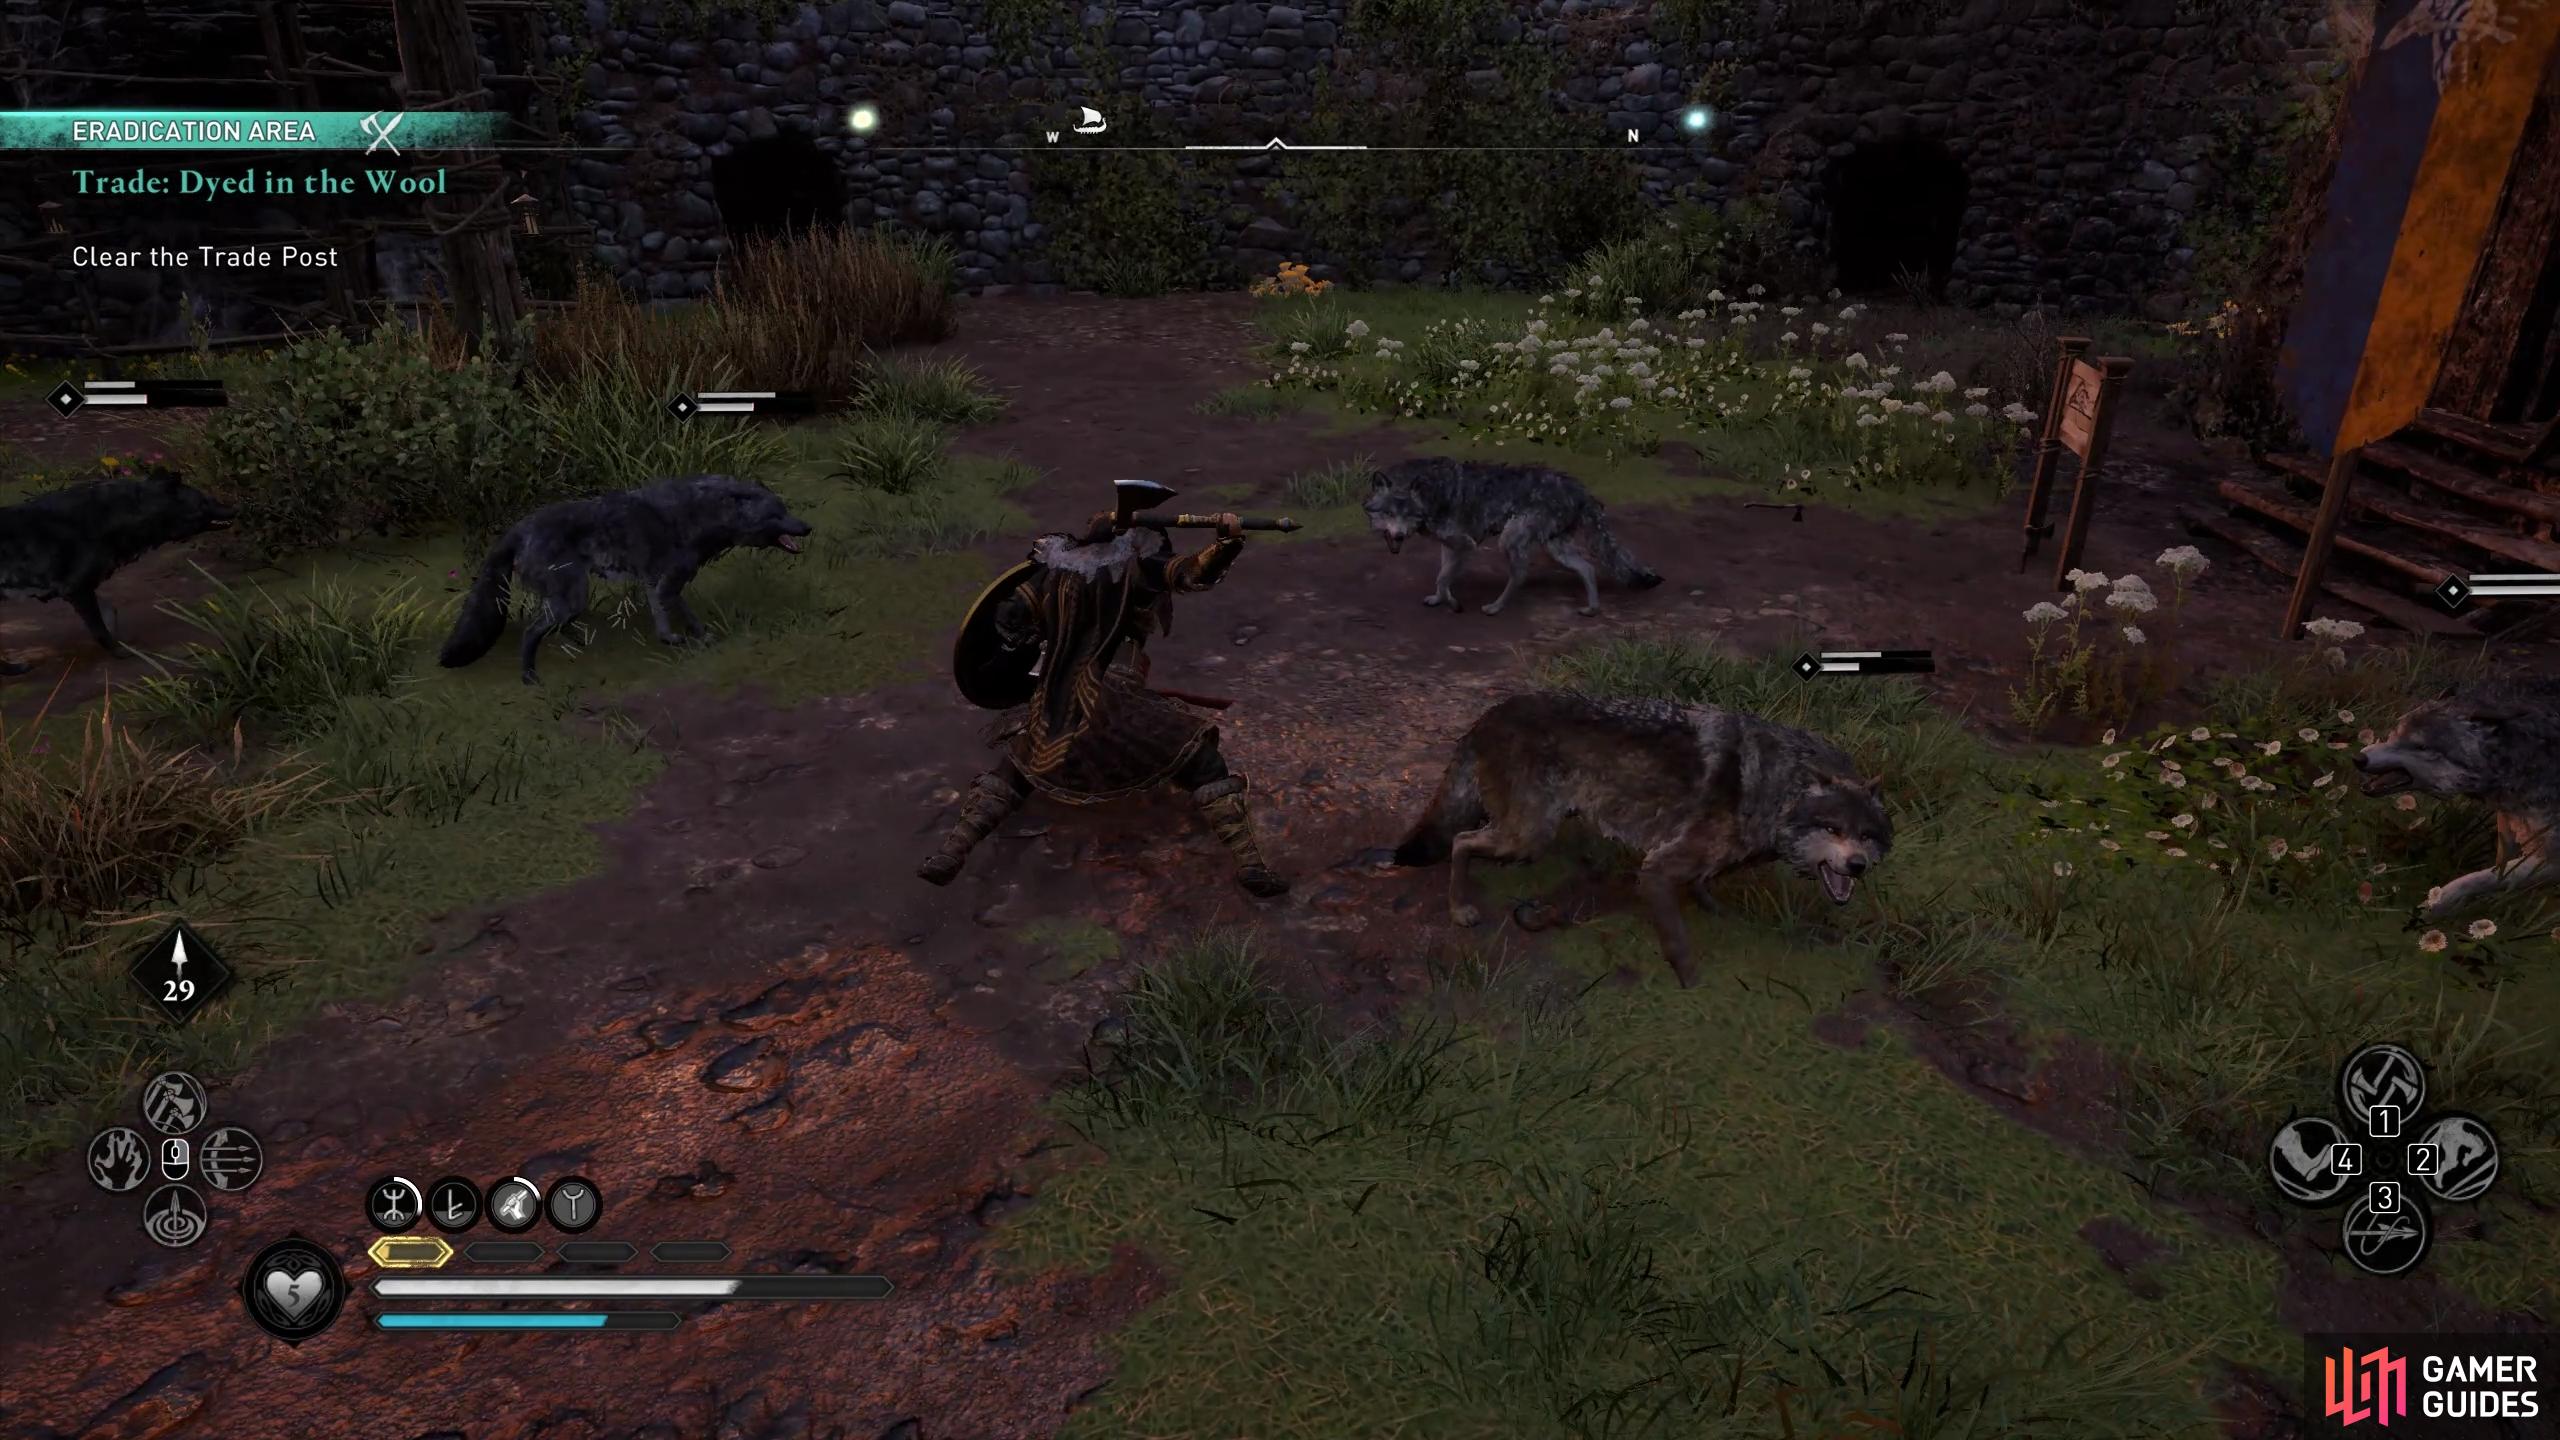 Youll need to clear Drumlish by killing all the wolves before you can investigate it.